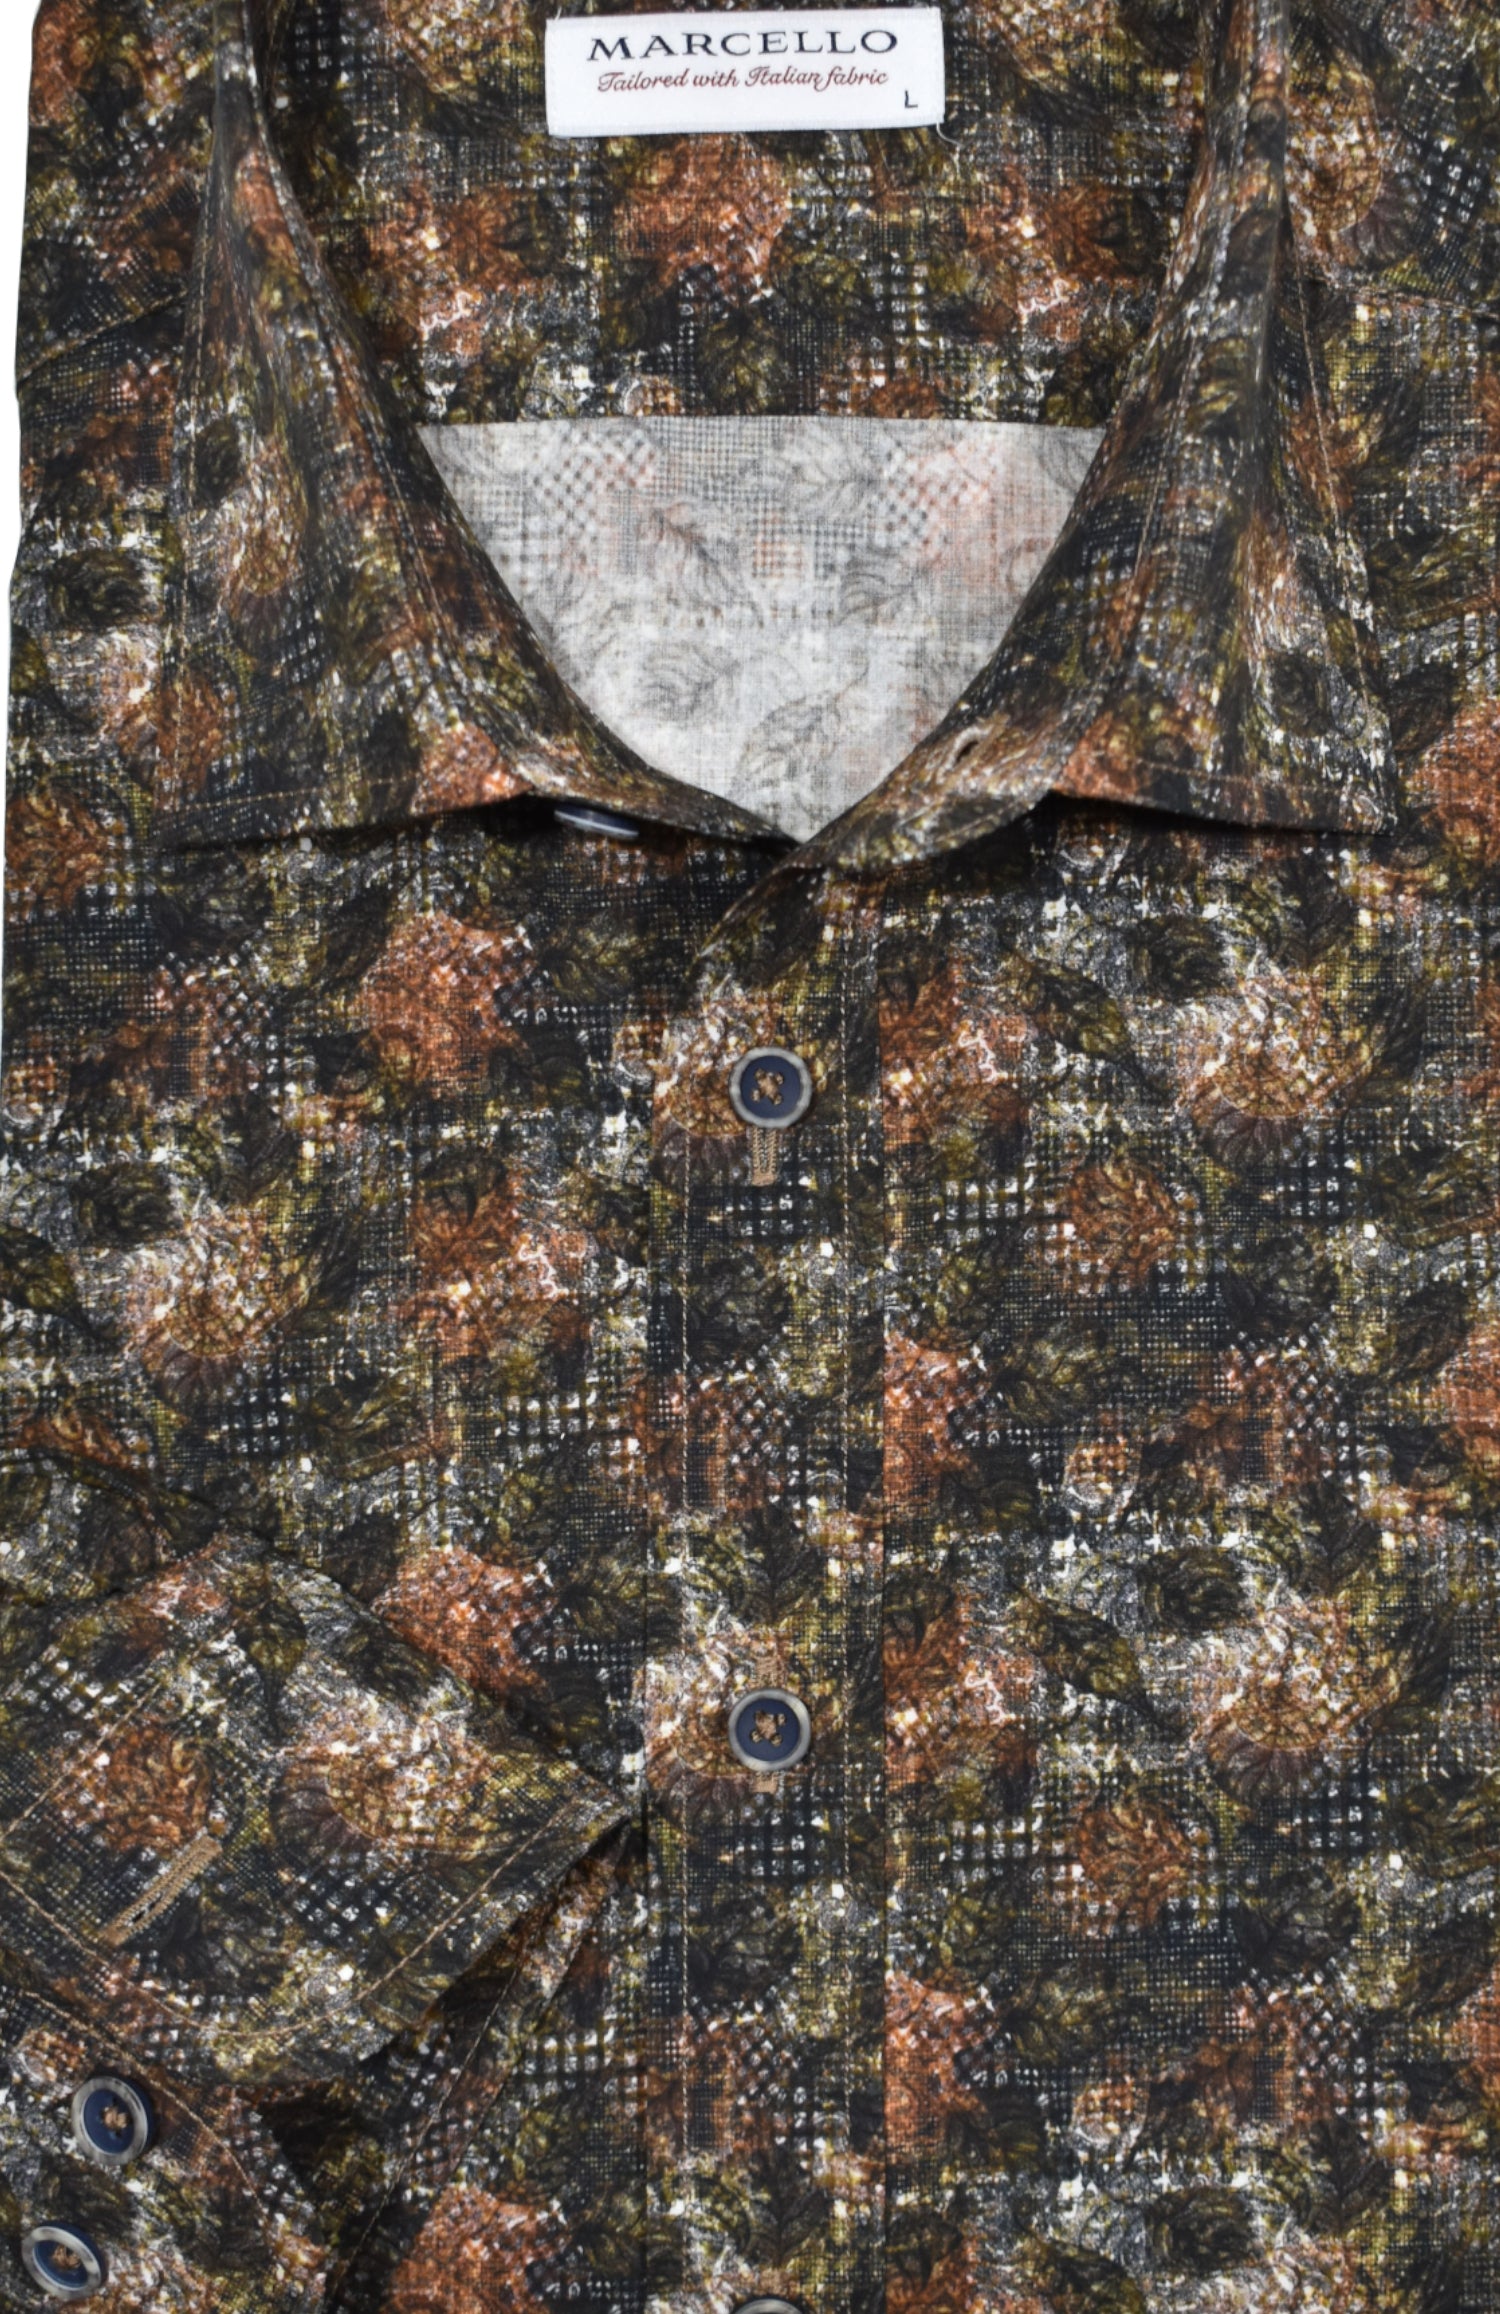 Indulge your senses with Marcello's Mochachino Abstract sport shirt! Featuring warm earth tones of mocha, chocolate, and tan, this versatile piece pairs perfectly with tan or chocolate bottoms for any occasion. Elevate your fashion game with this must-have addition to your wardrobe!